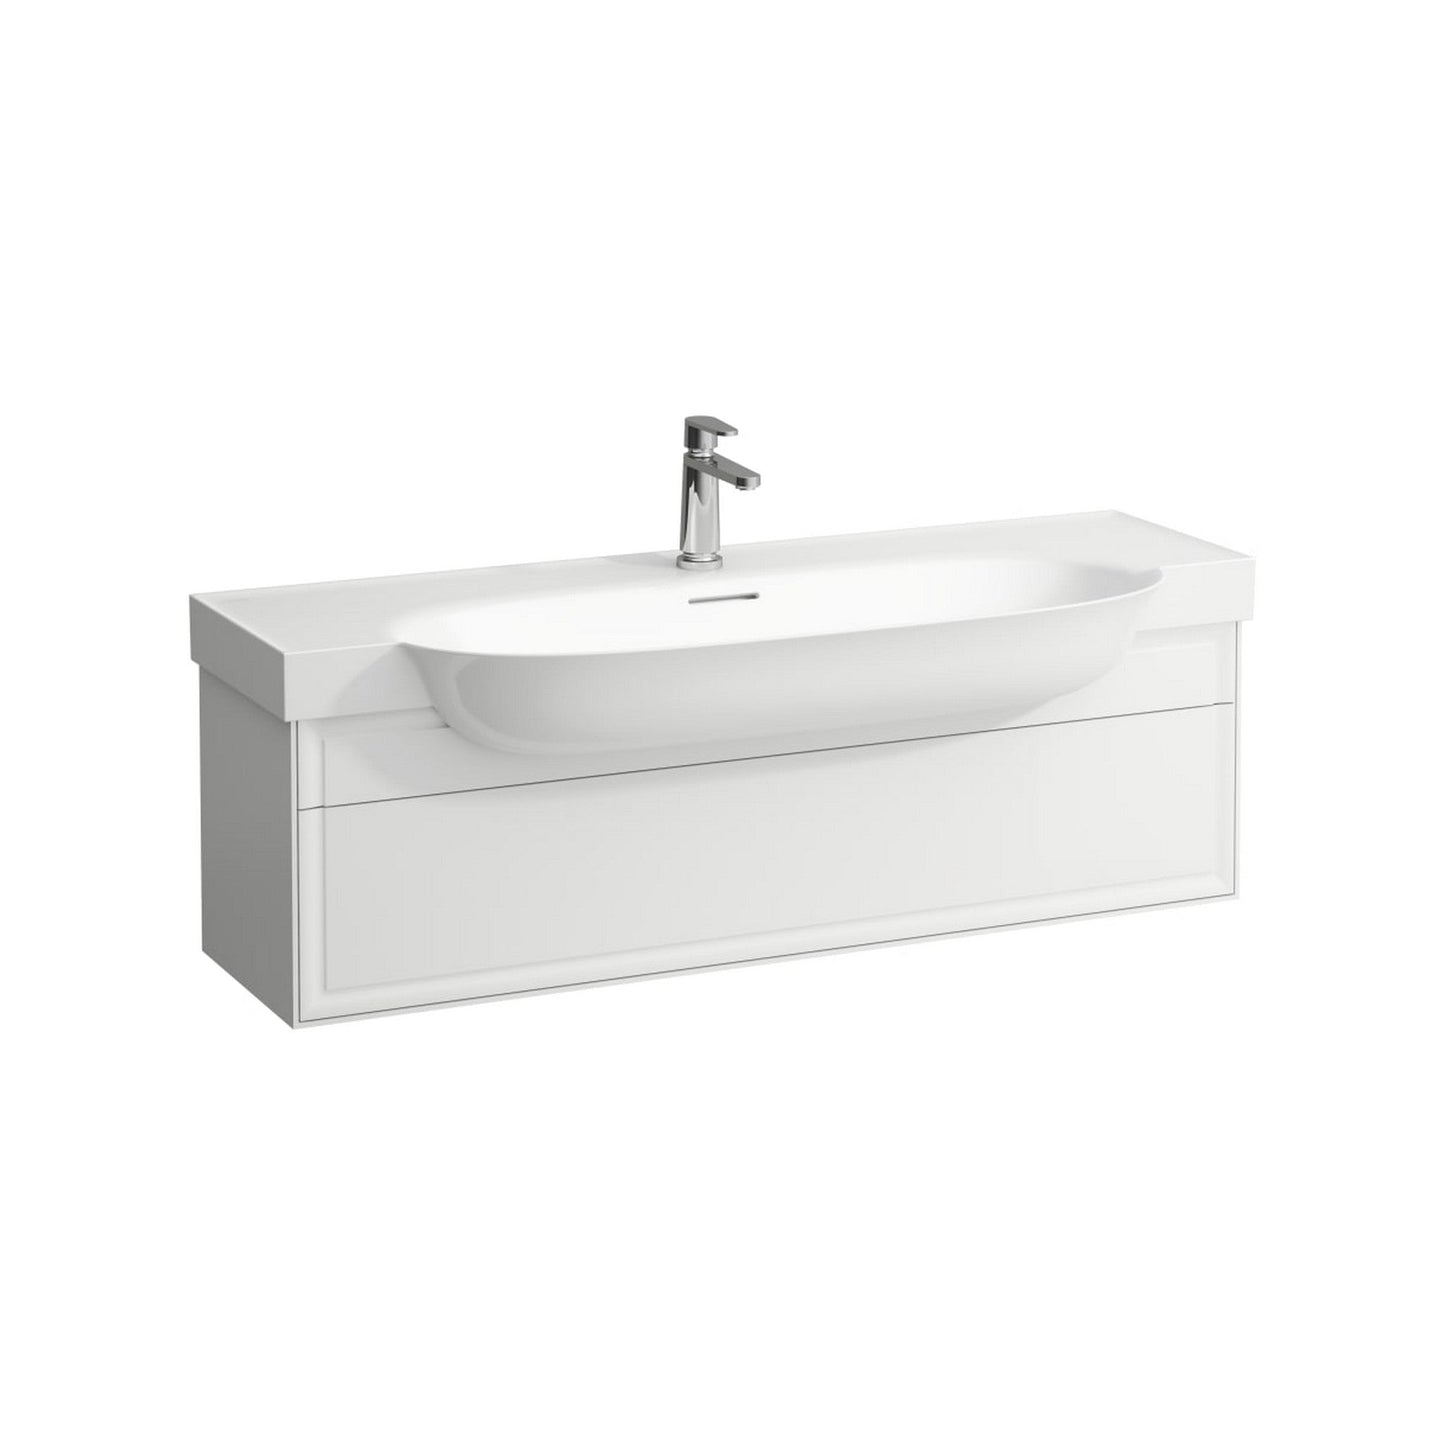 Laufen New Classic 46" 1-Drawer Matte White Wall-Mounted Vanity for New Classic Bathroom Sink Model: H813858